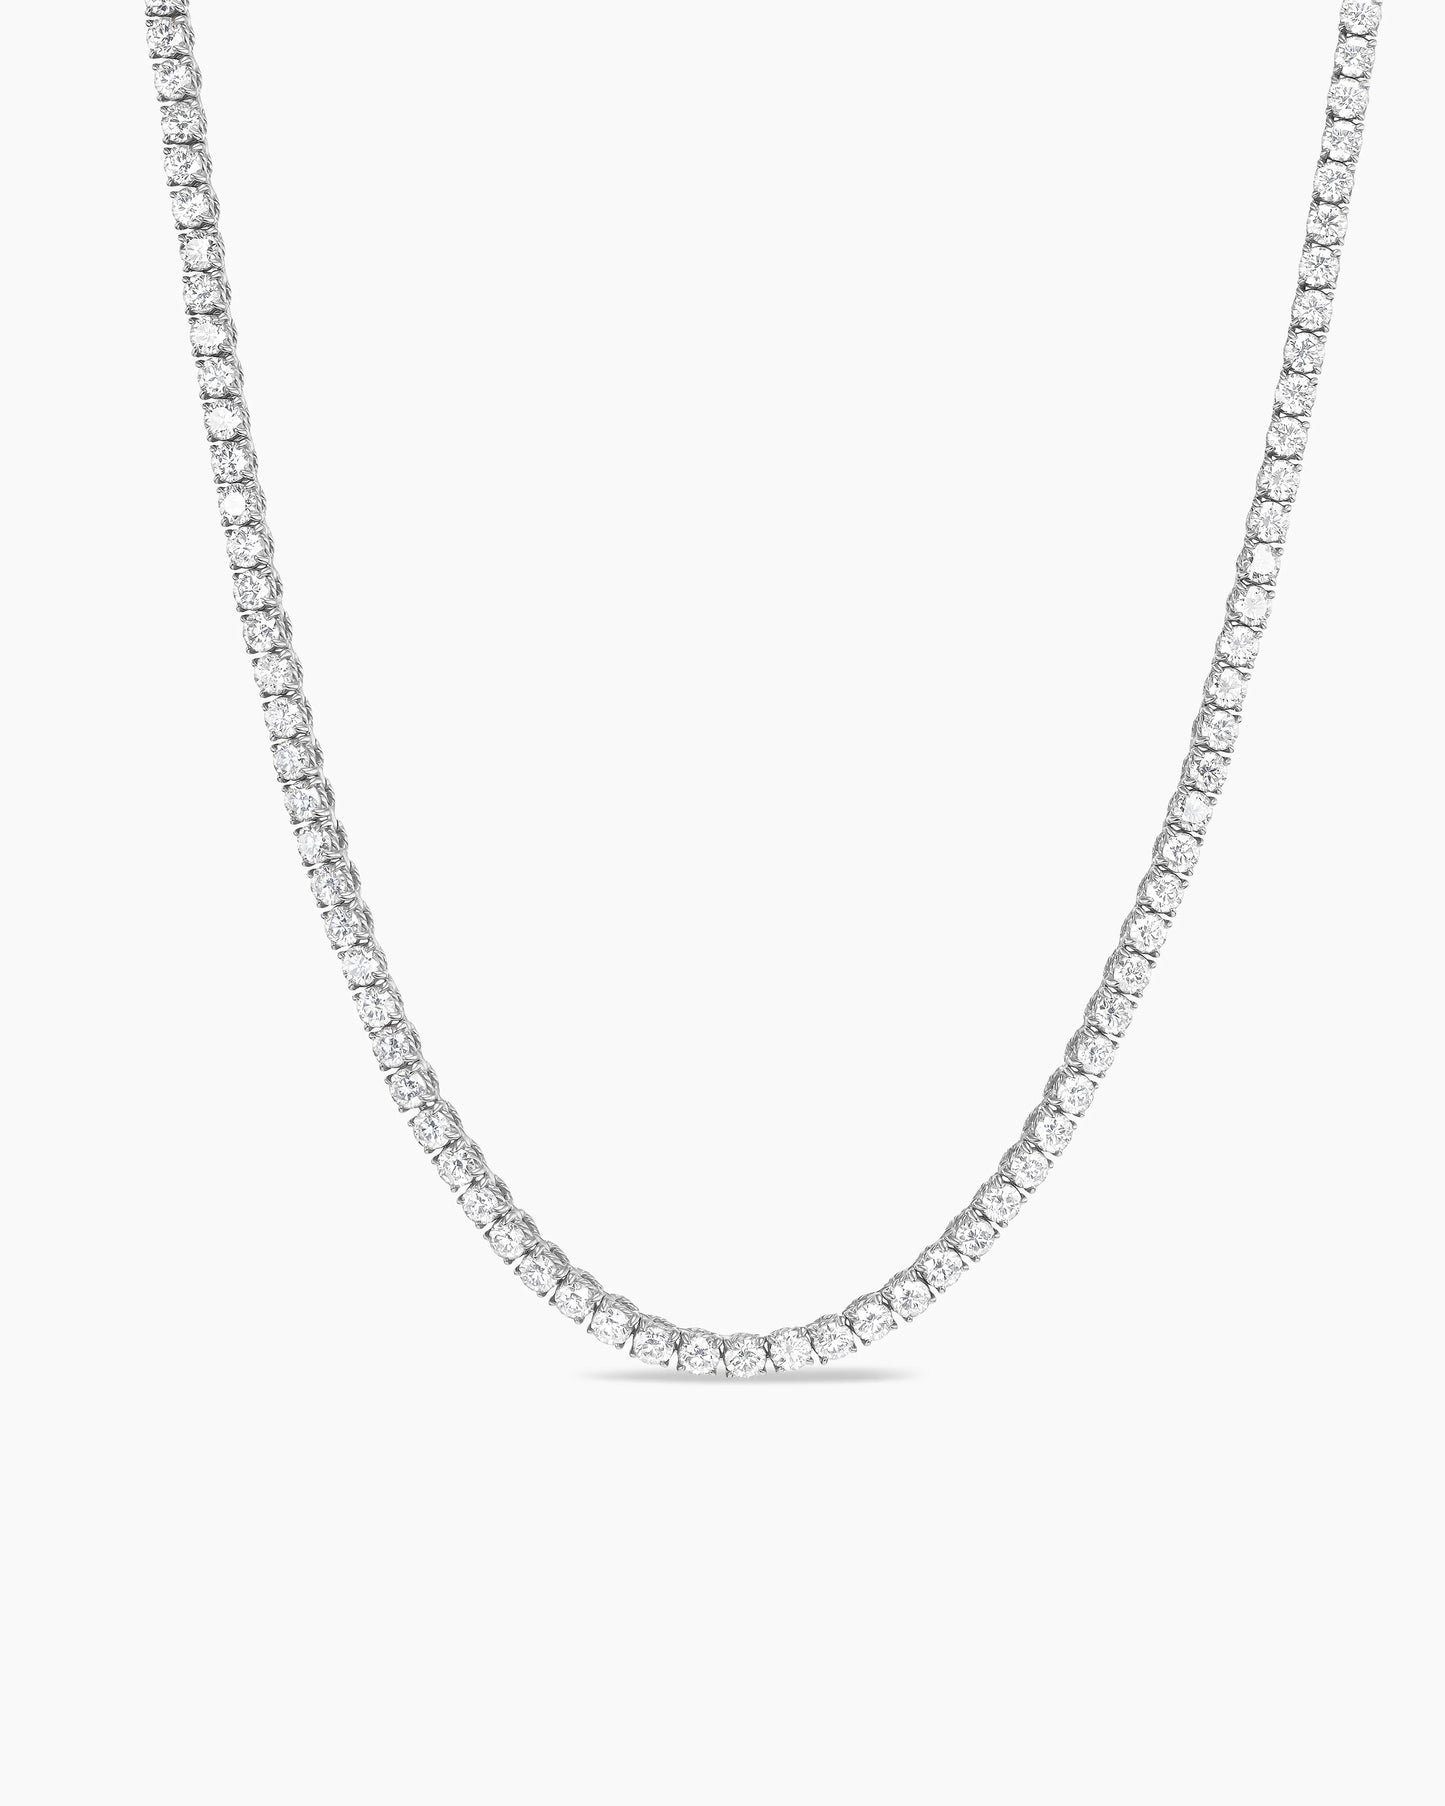 Tennis Necklace Chain 3mm 14k White Gold Tone 18-24 Inch